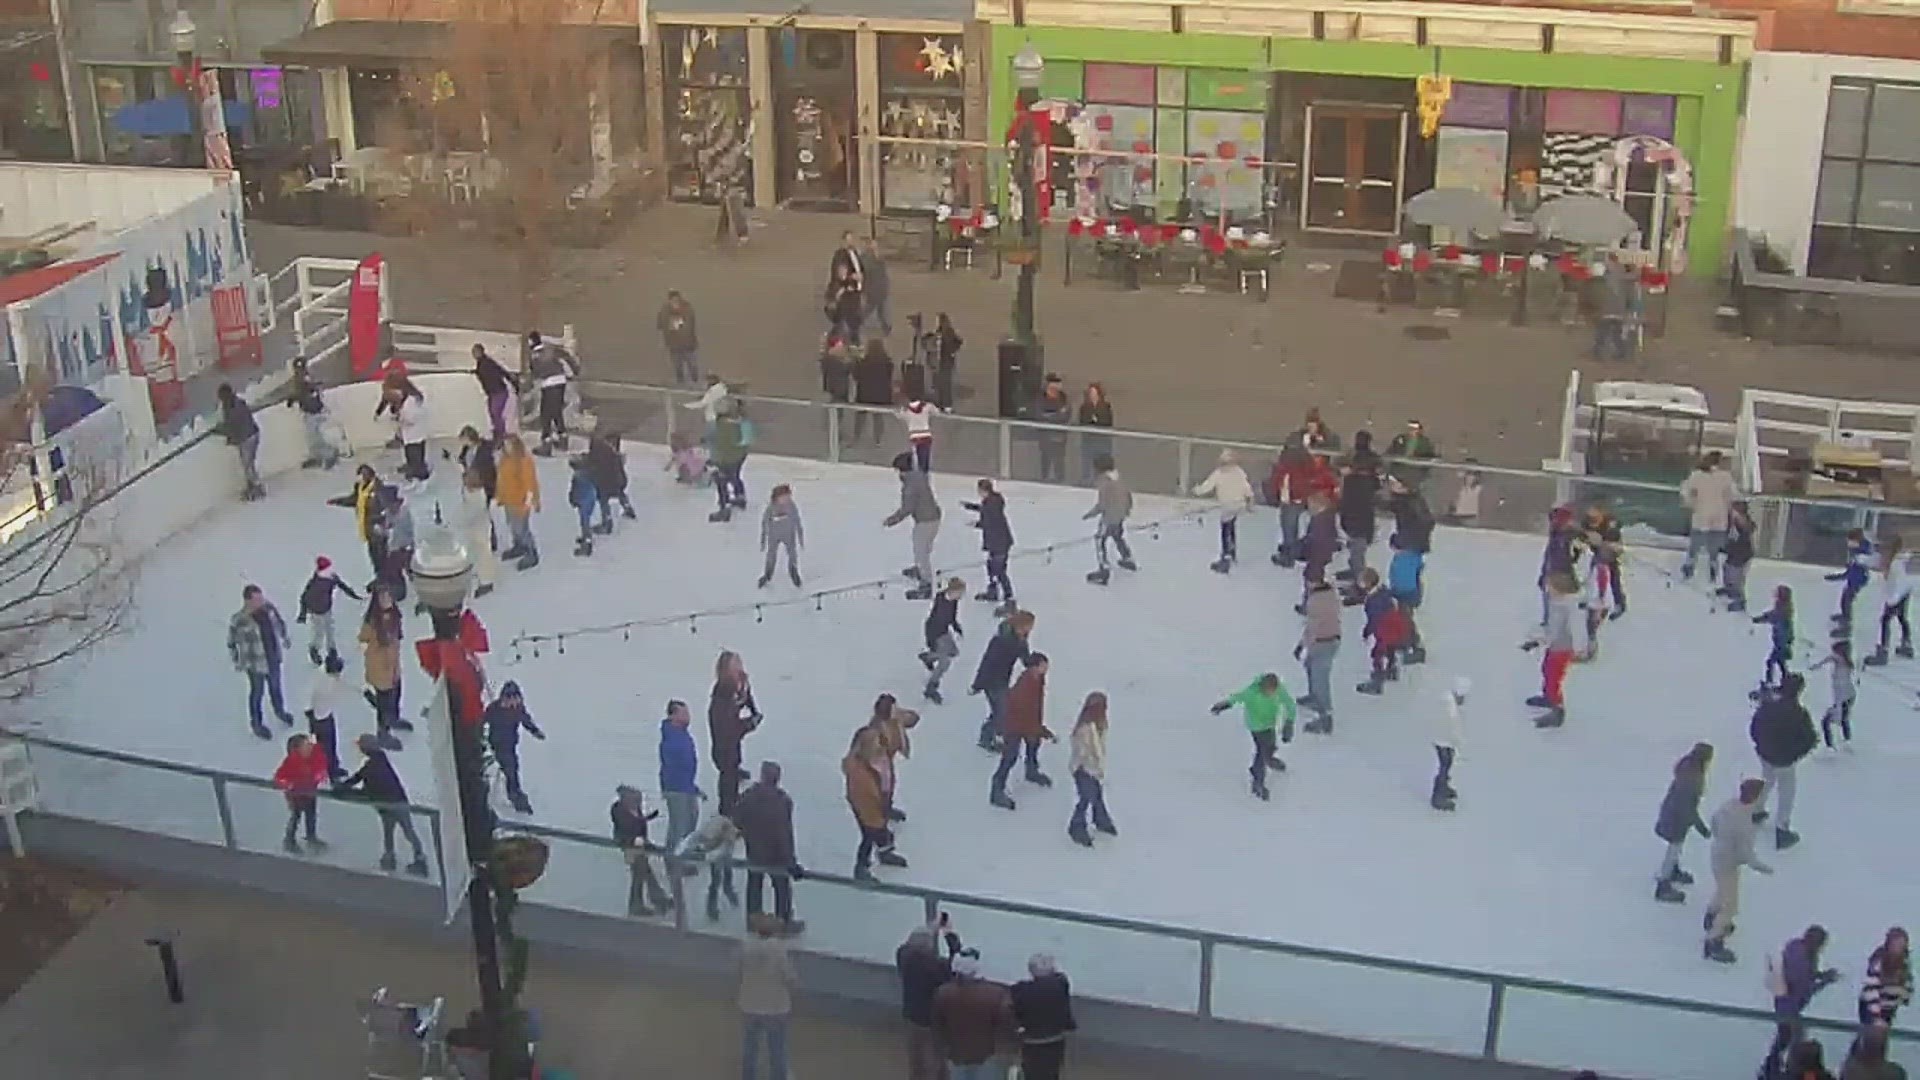 The ice rink is open through the new year.